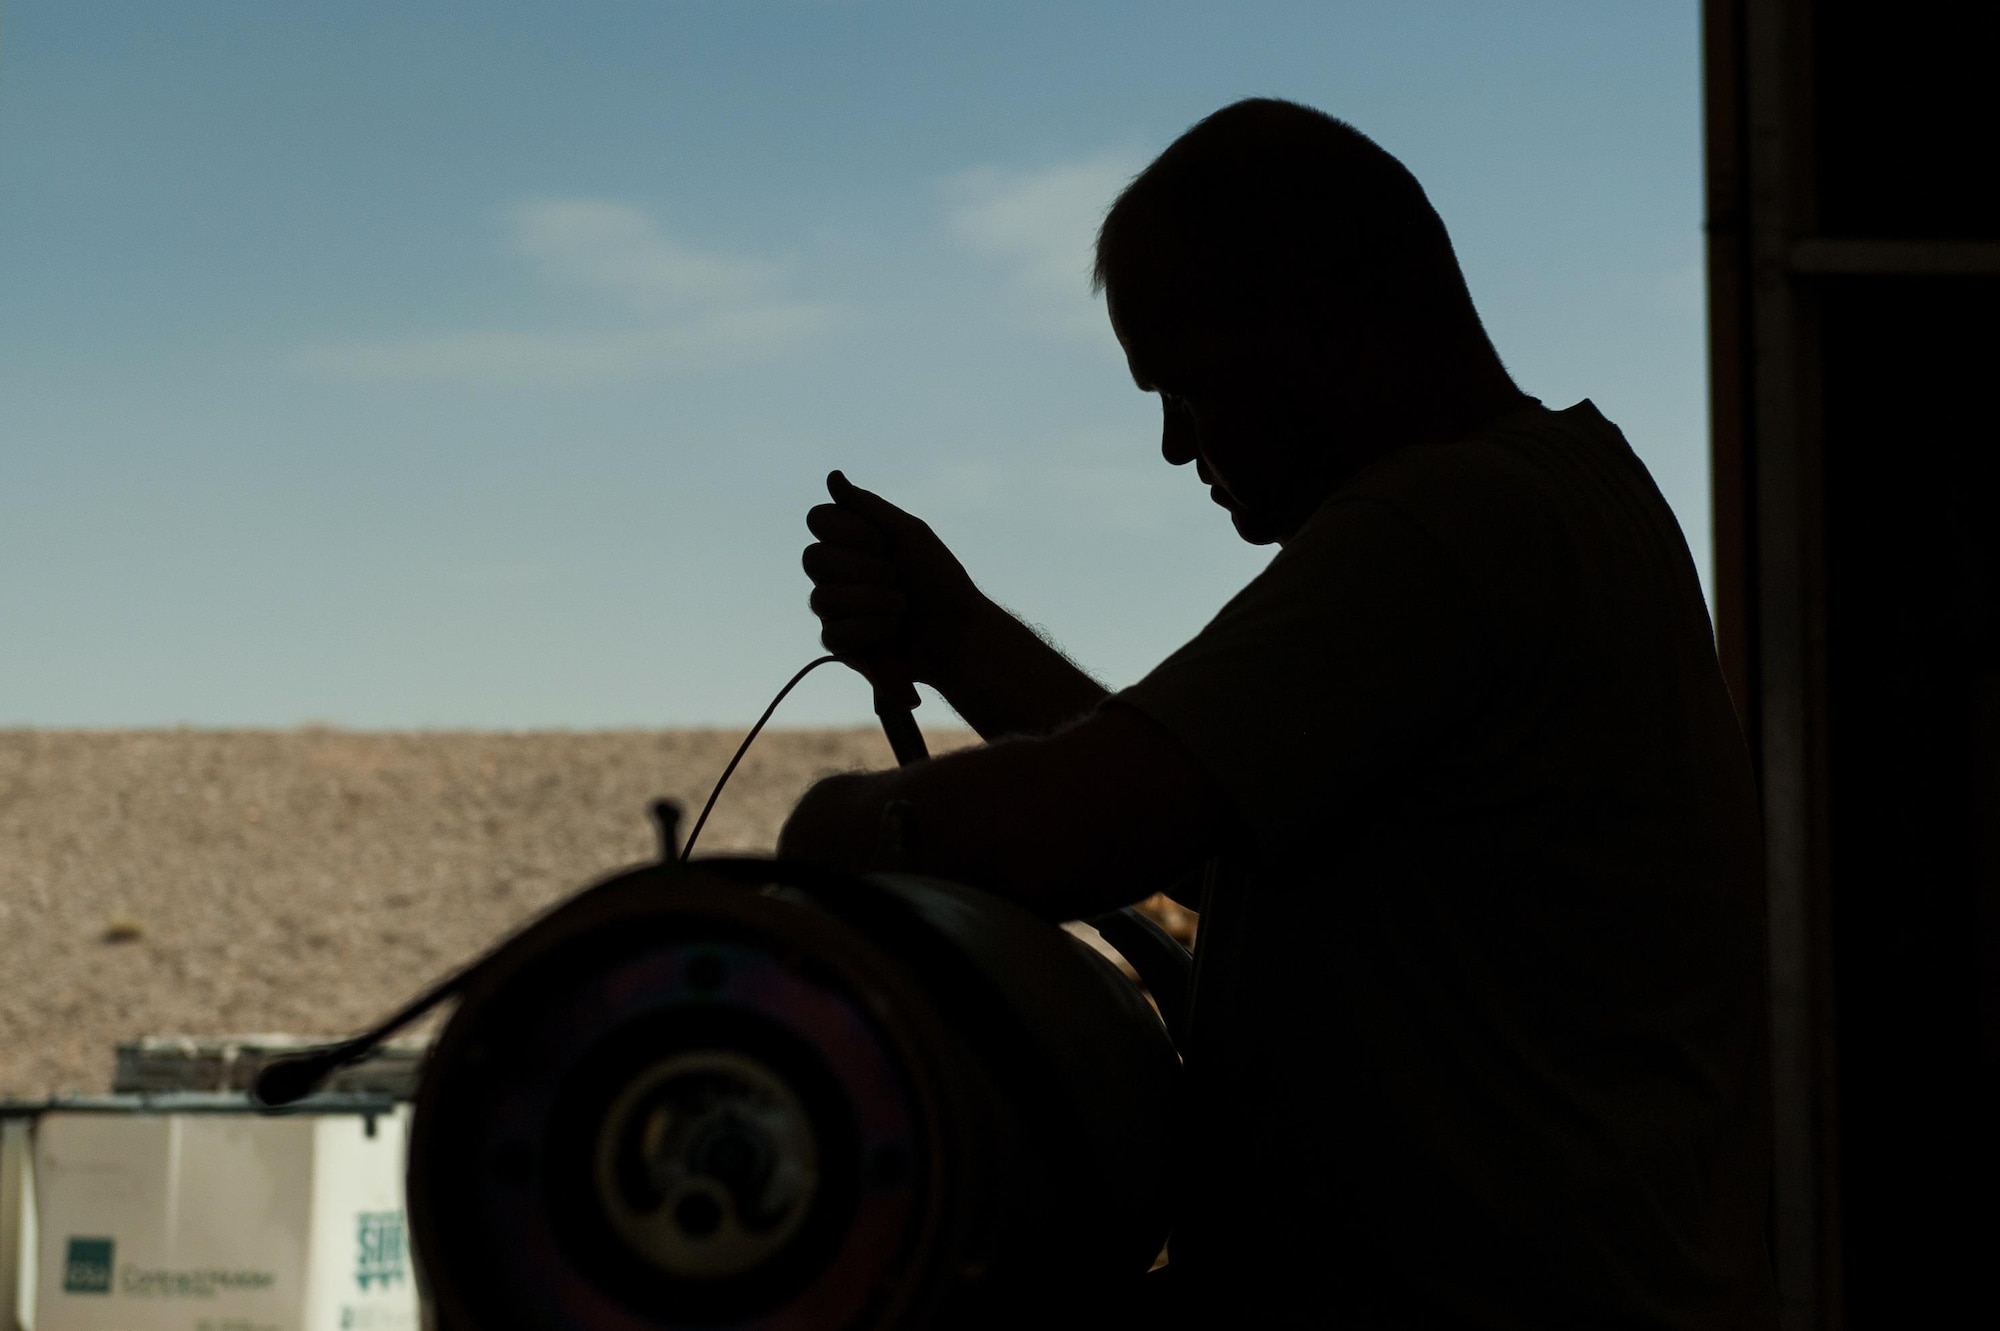 A U.S. Airman assigned to the 62nd Expeditionary Reconnaissance Squadron munitions flight, builds a GPS-guided GBU-49 weapon at Kandahar Airfield, Afghanistan, Aug. 15, 2015.  The 62nd ERS Munitions Flight ensures that every munition loaded onto an MQ-1 Predator and MQ-9 Reaper will perform as expected when used. (U.S. Air Force photo by Tech. Sgt. Joseph Swafford/Released)